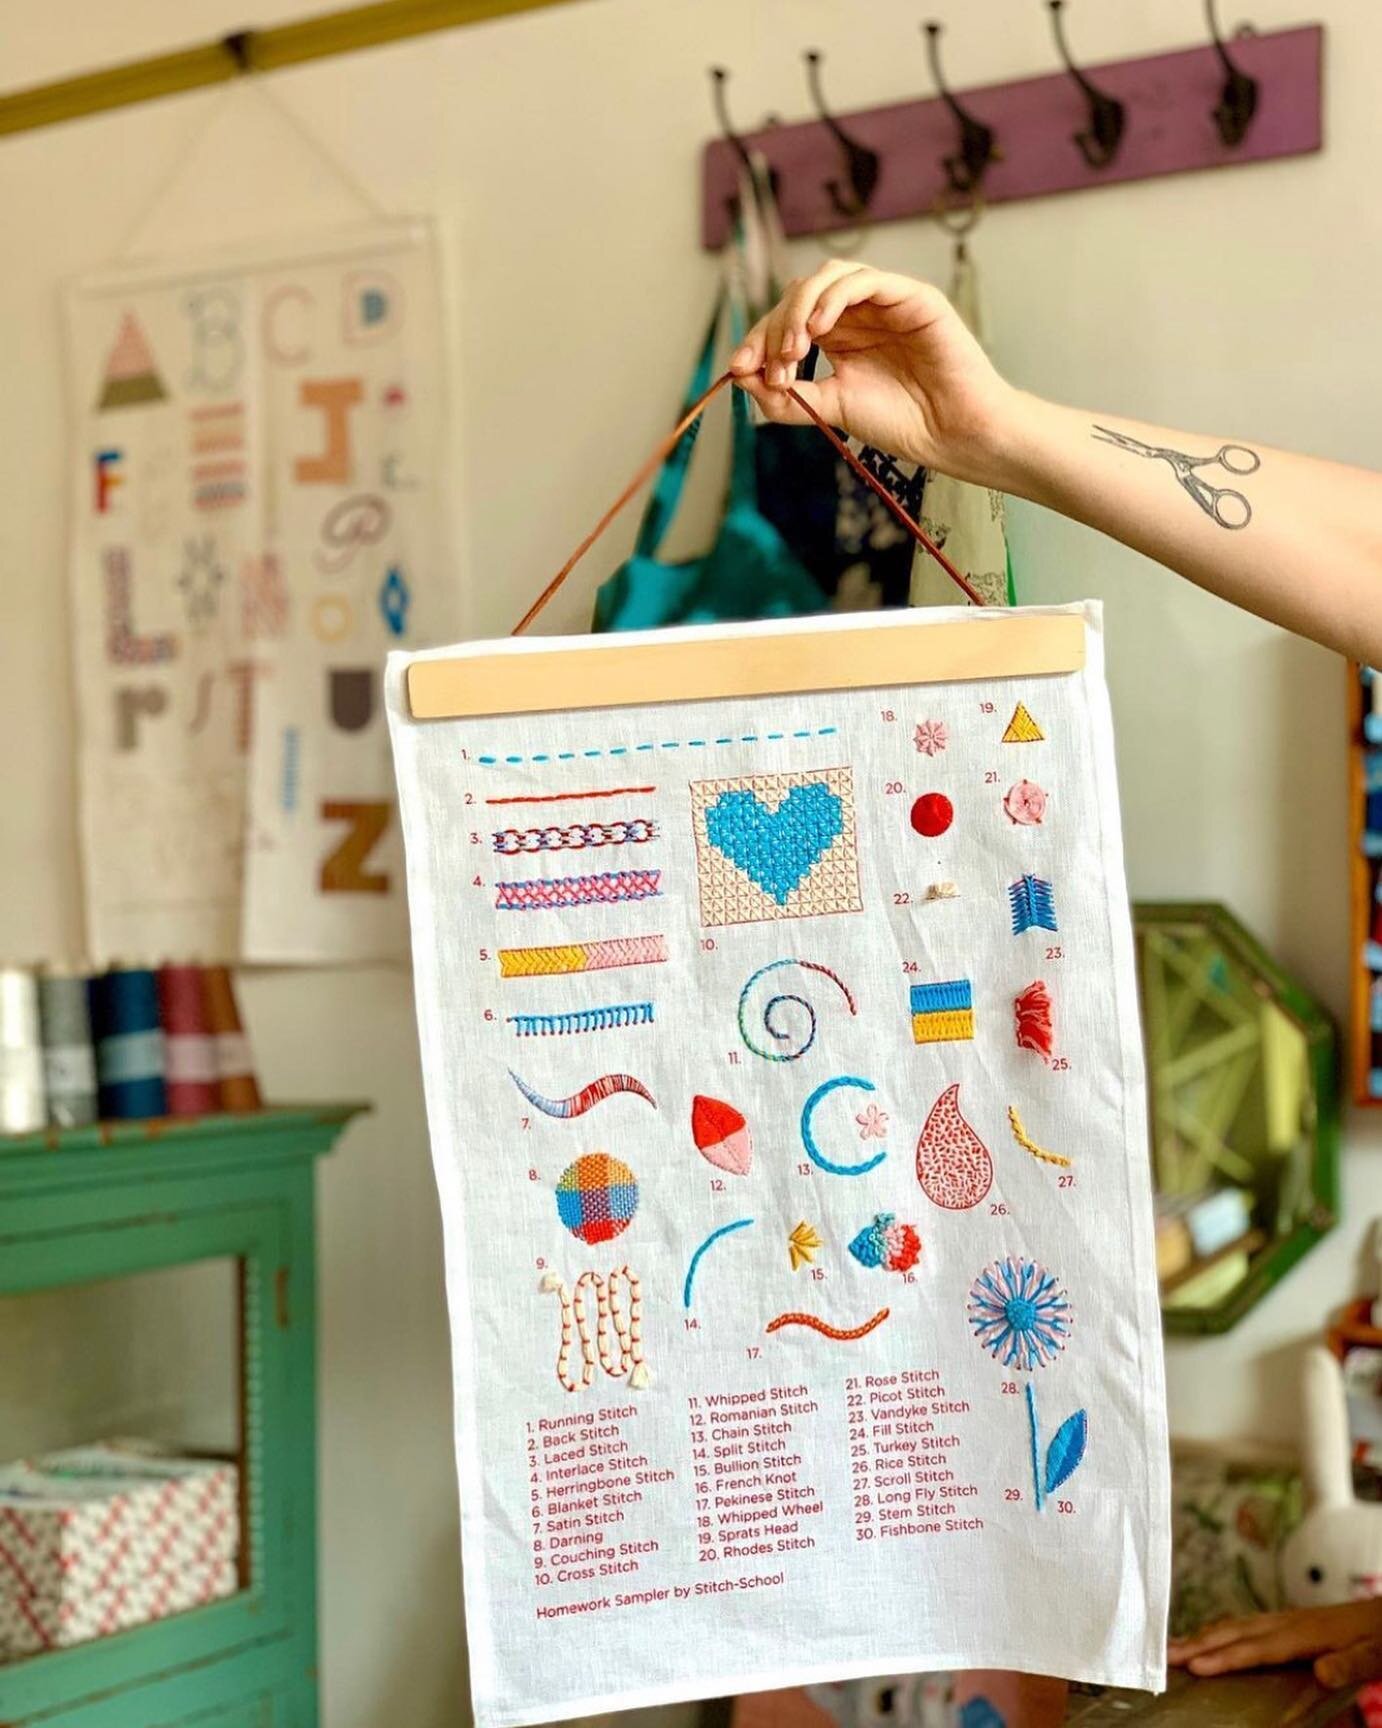 Never mind the embroidery - check out the tattoo! ✂️🥰 @looplondonloves #lovestitch